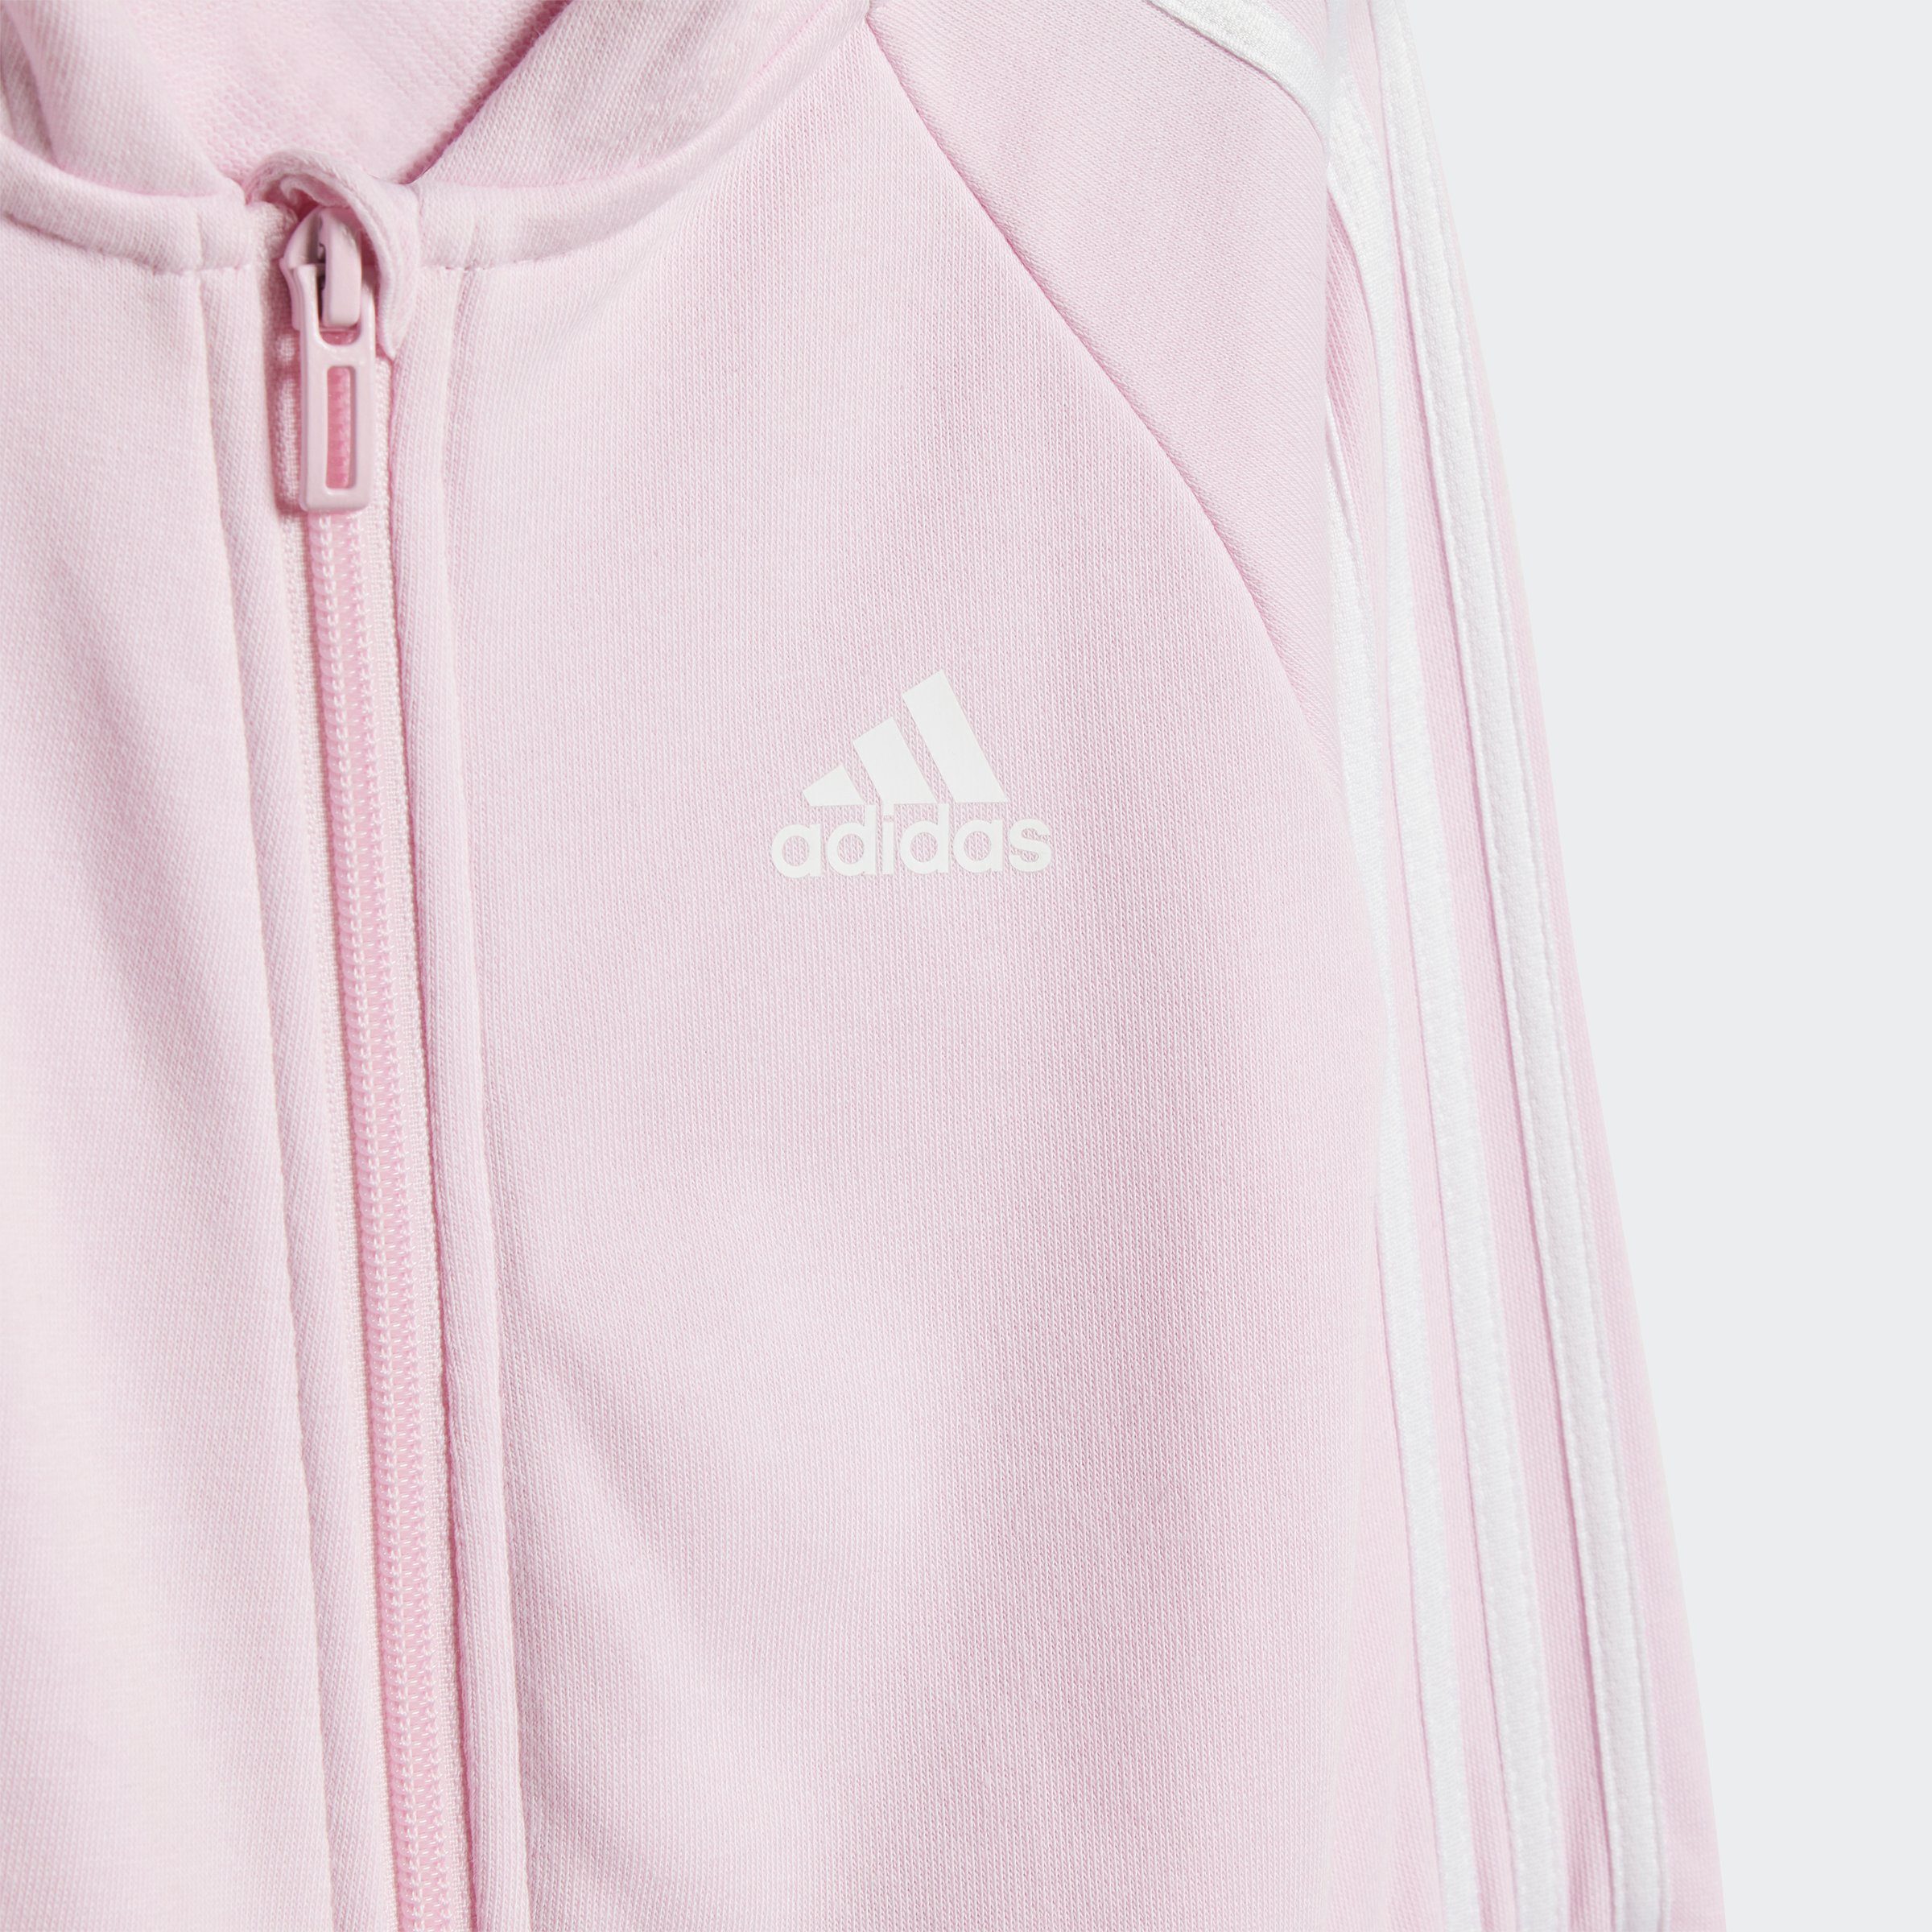 I White Pink / Clear Sportswear ONESIE 3S FT Overall adidas